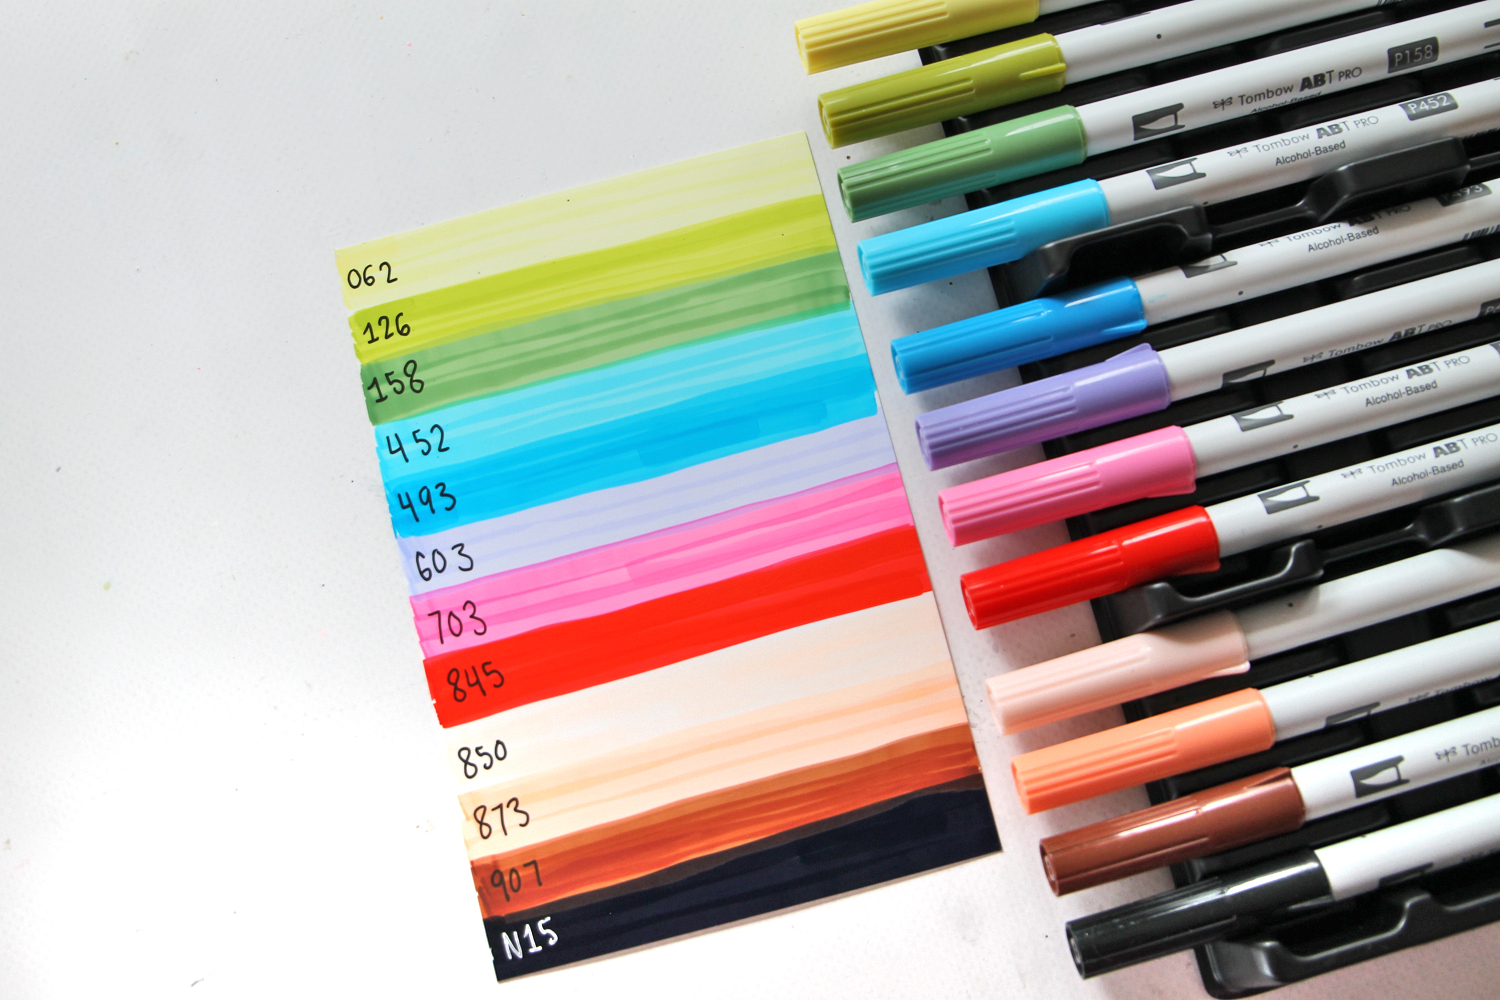 Tombow ABT PRO Alcohol-Based Dual Tip Markers